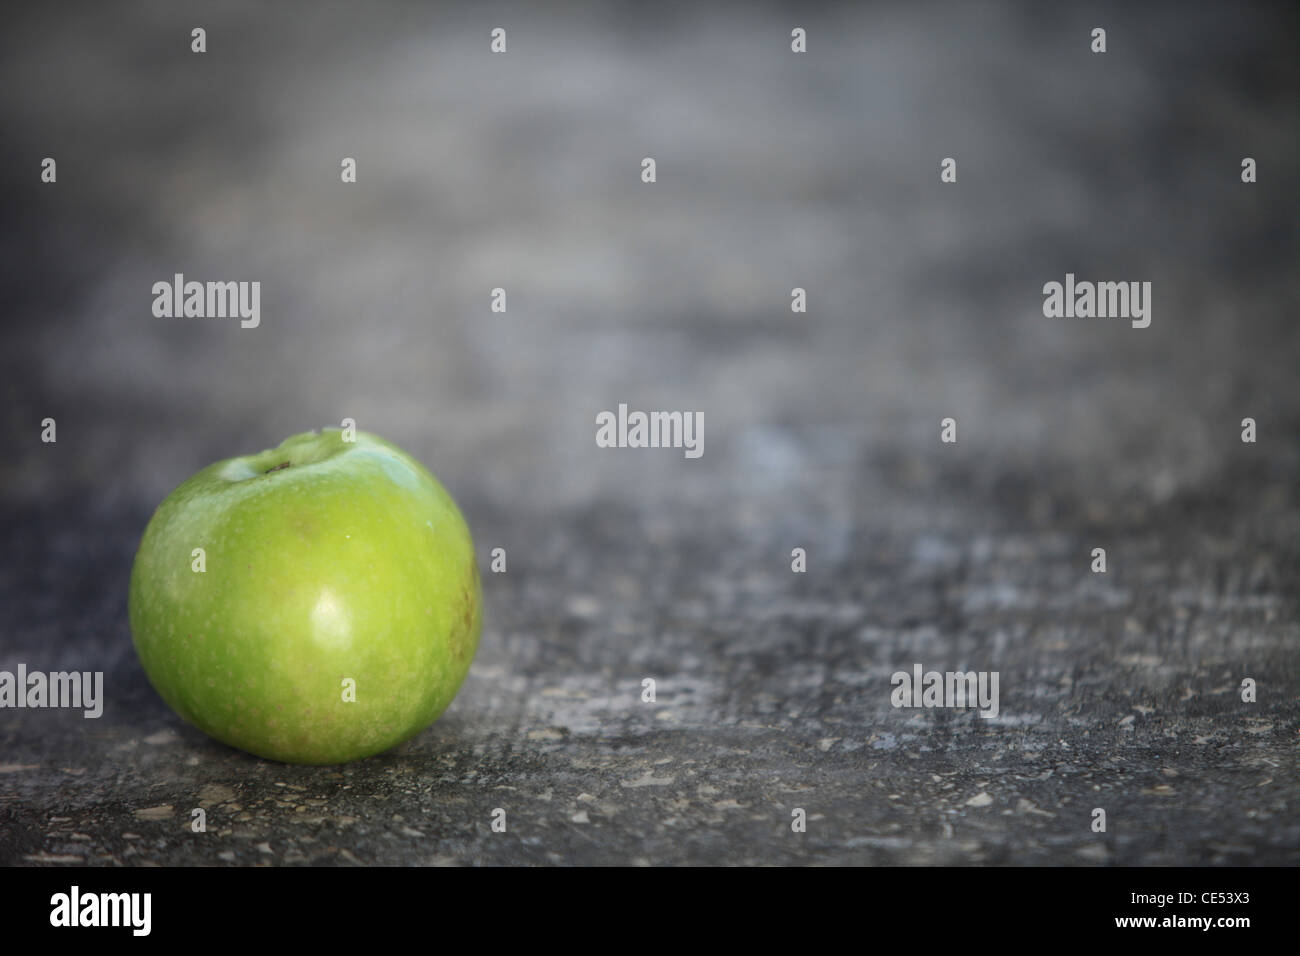 green fresh juicy apple is on the invoice table Stock Photo